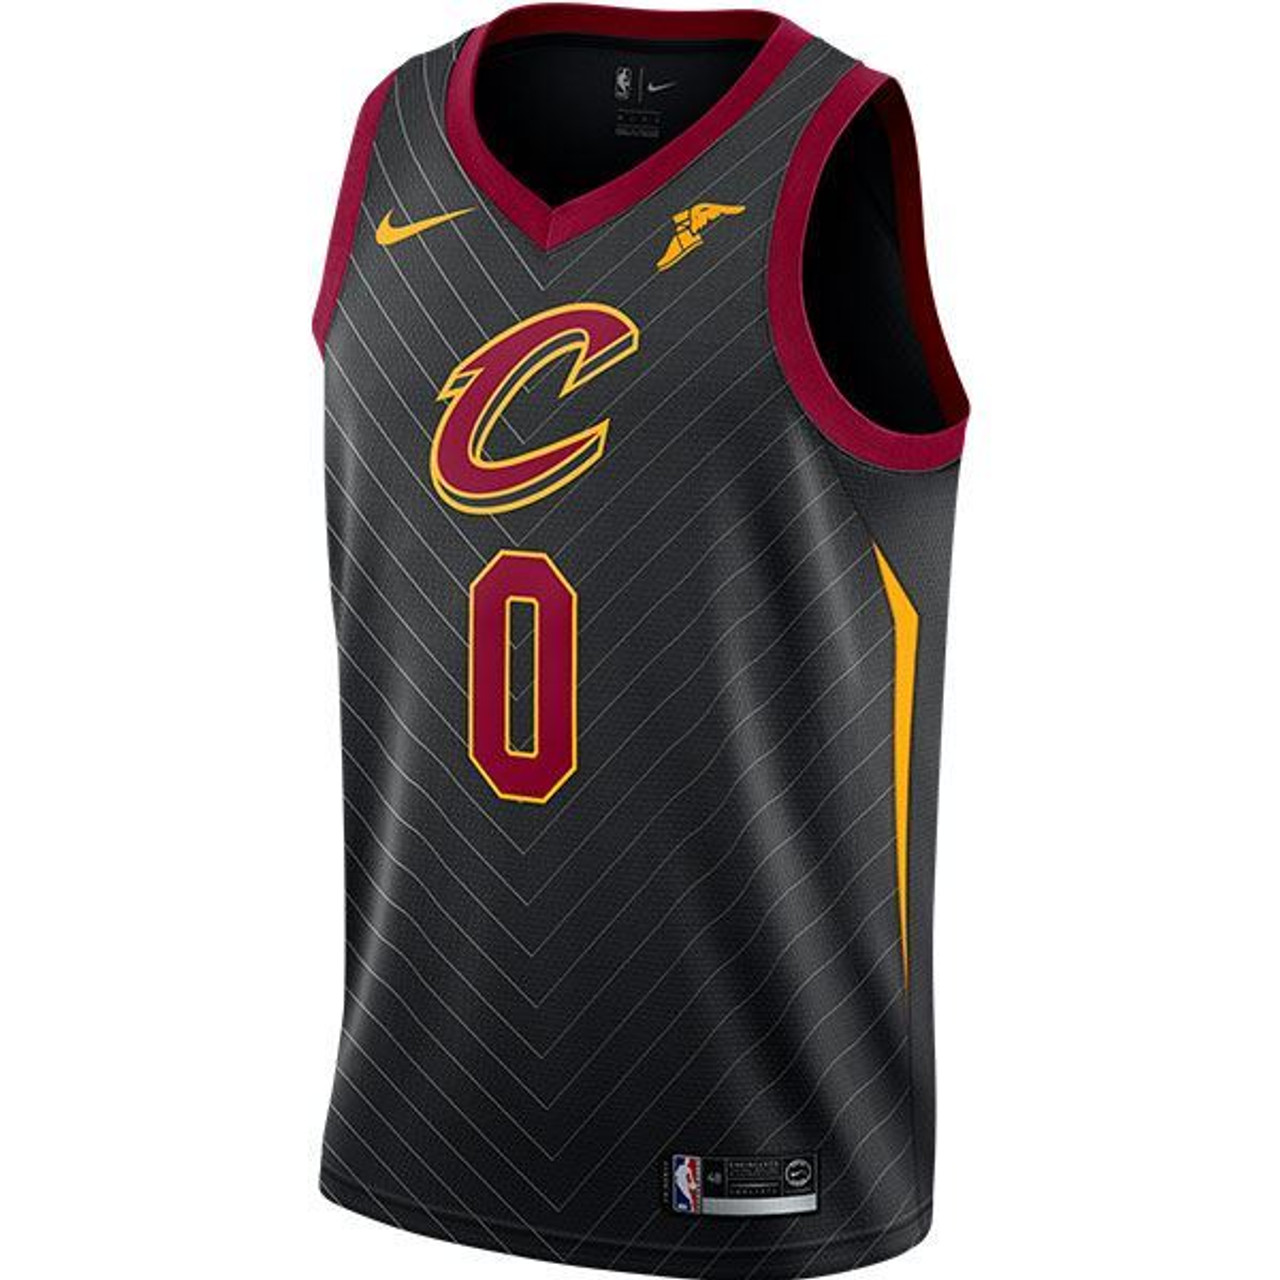 Kevin Love Jersey | Cleveland Cavaliers